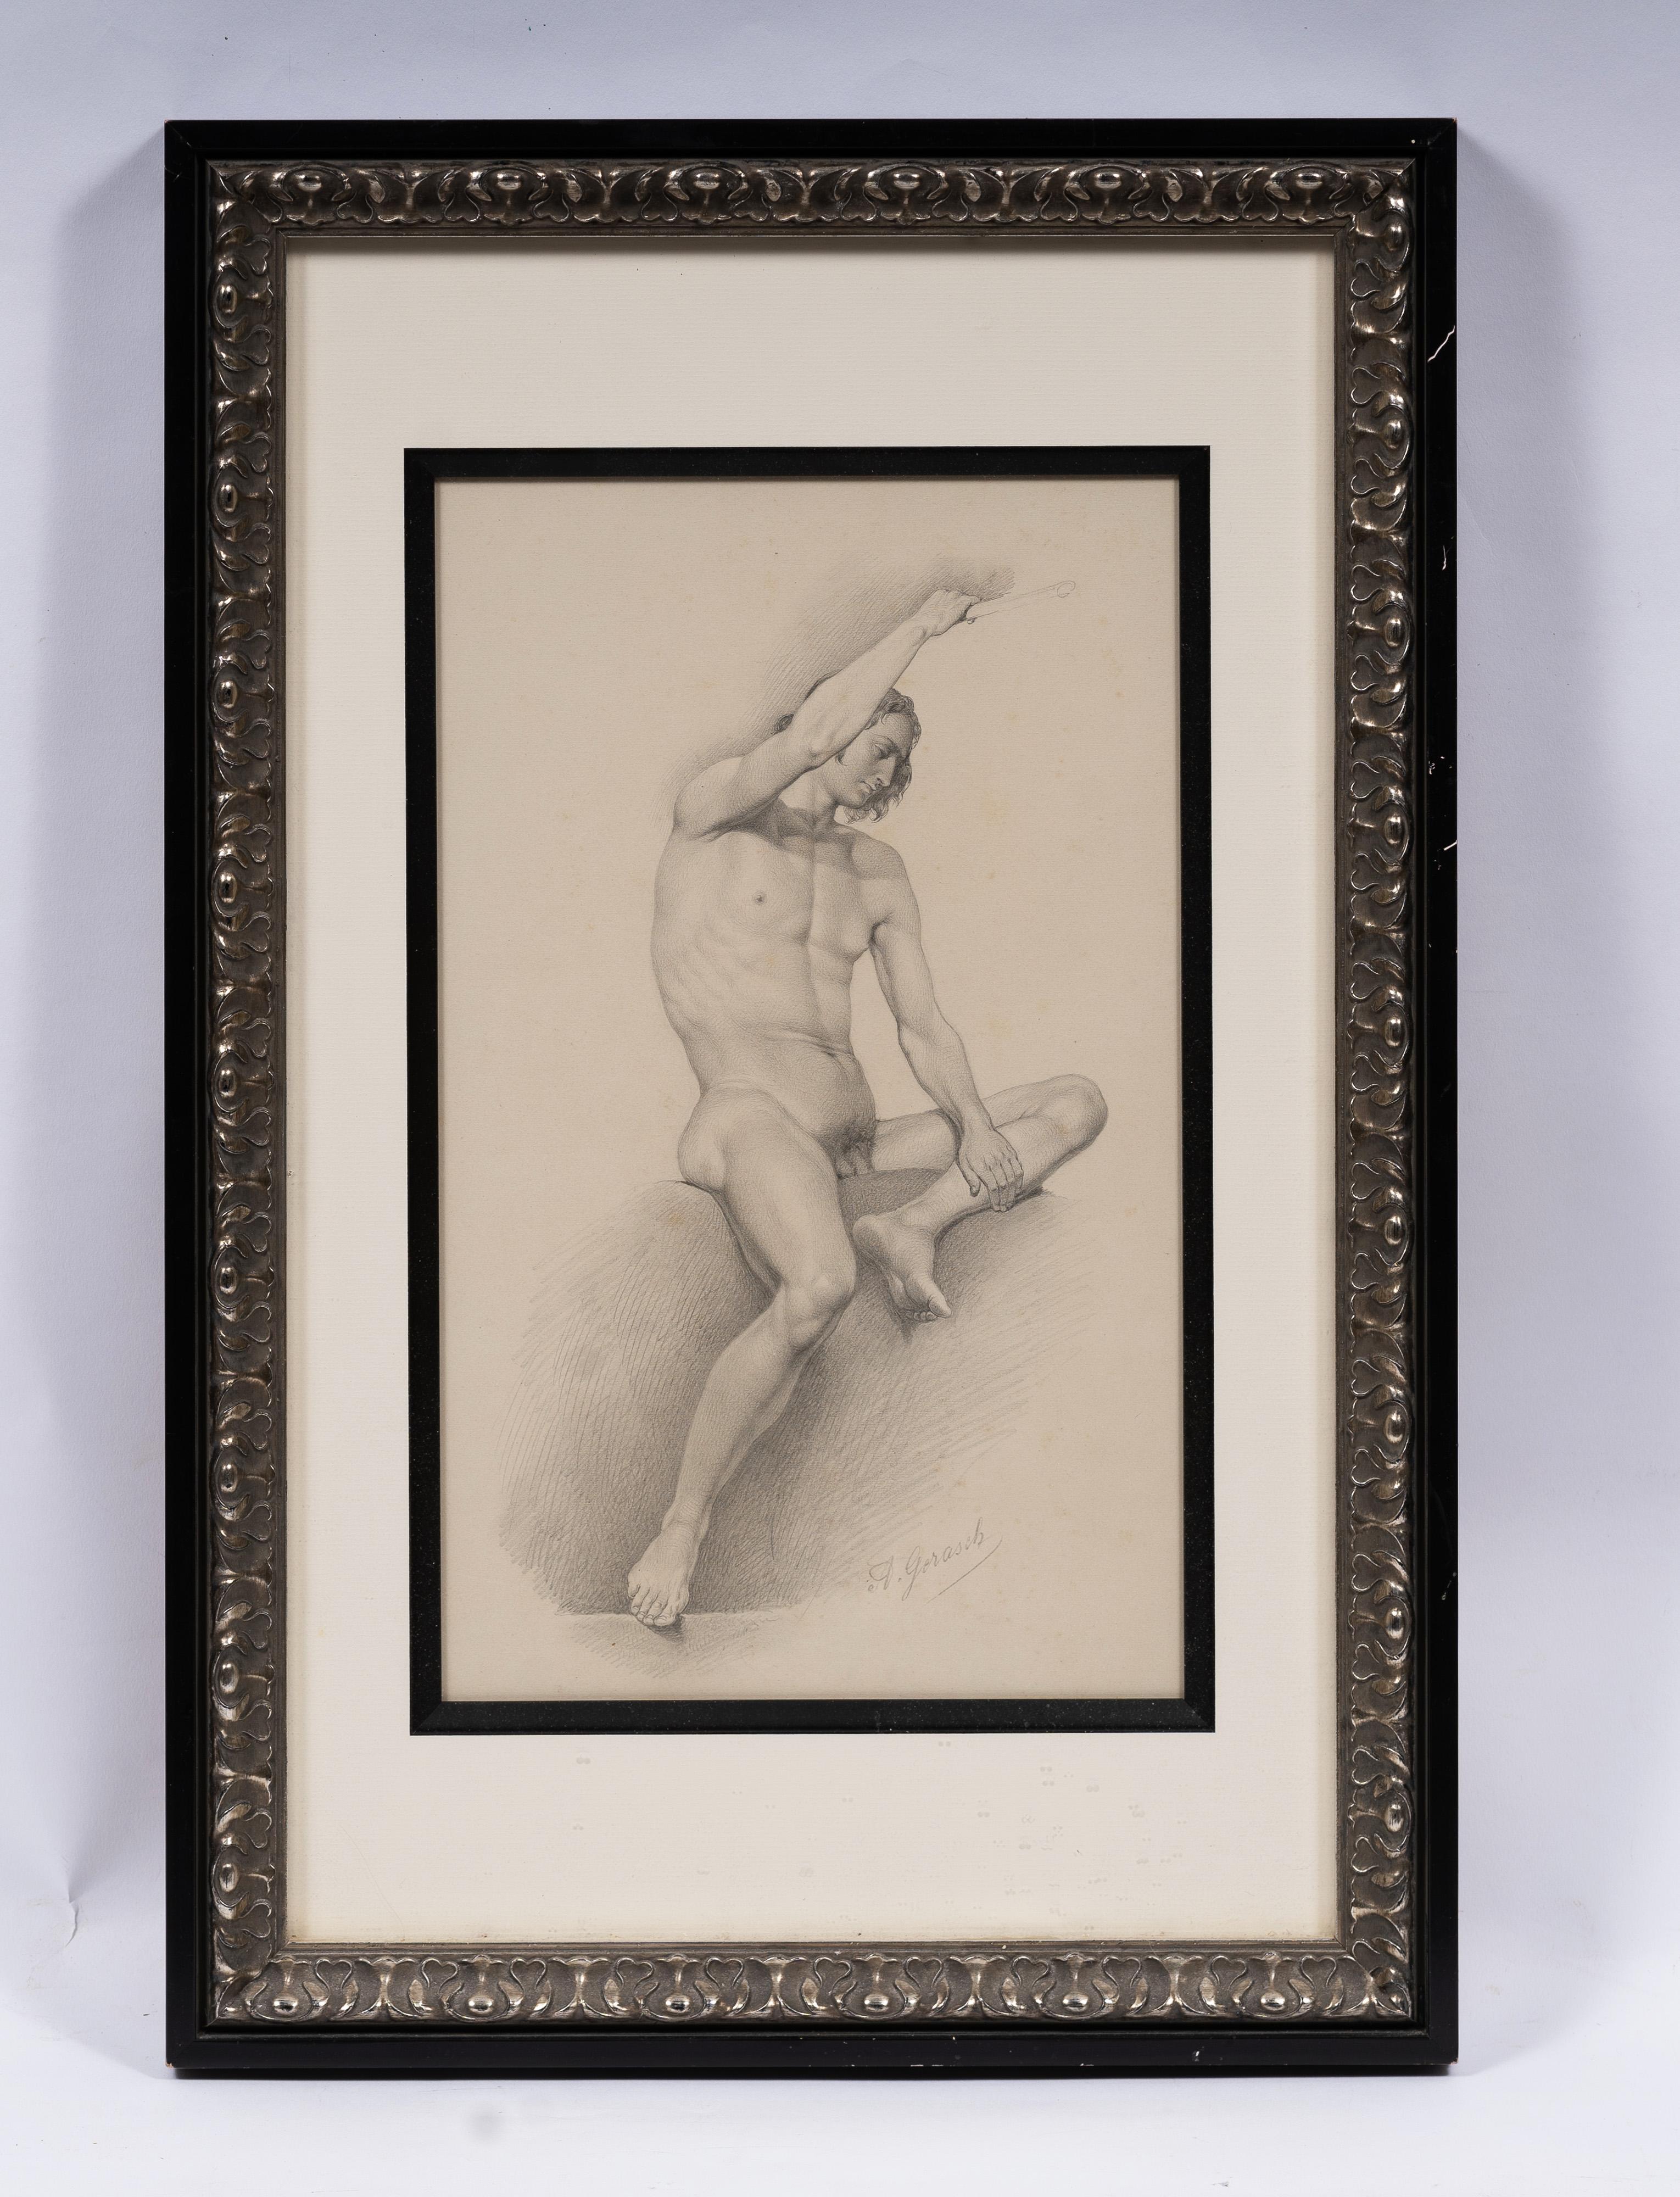 Antique Austrian Signed Classical Muscular Male Nude 19th Century Framed Drawing - Realist Painting by August Gerasch